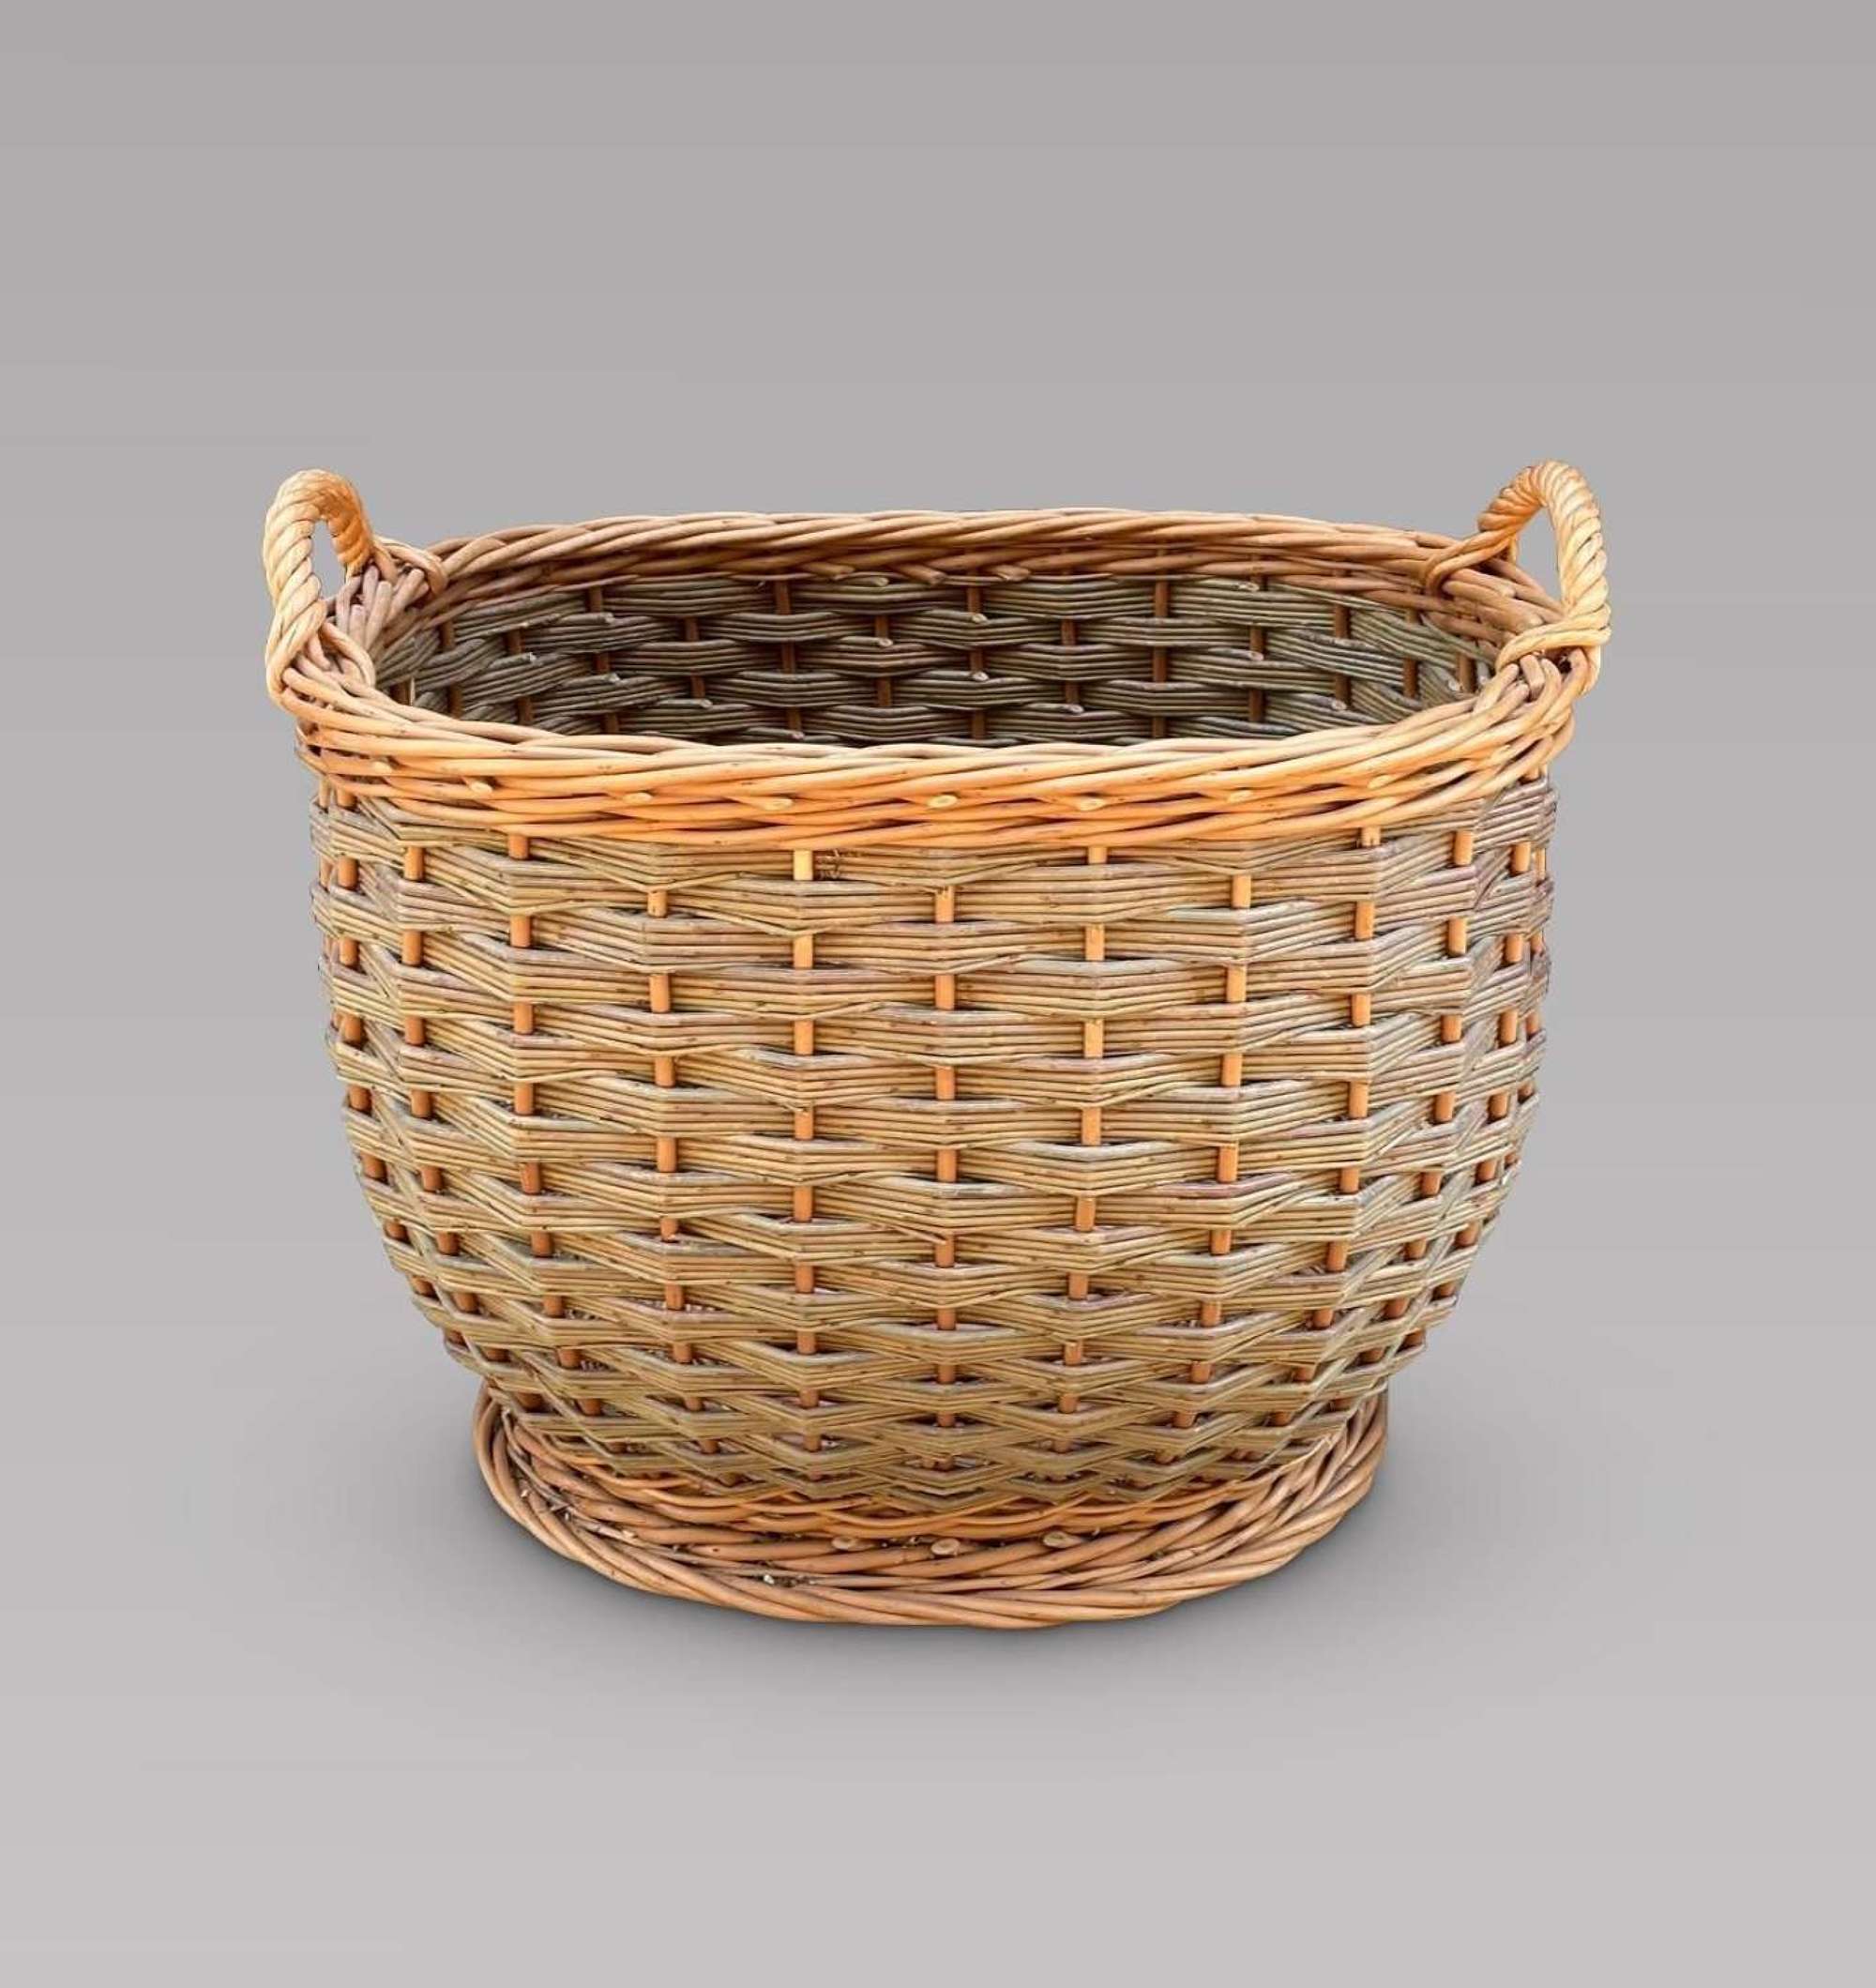 A Good Sized Oval Wicker Basket with Handles